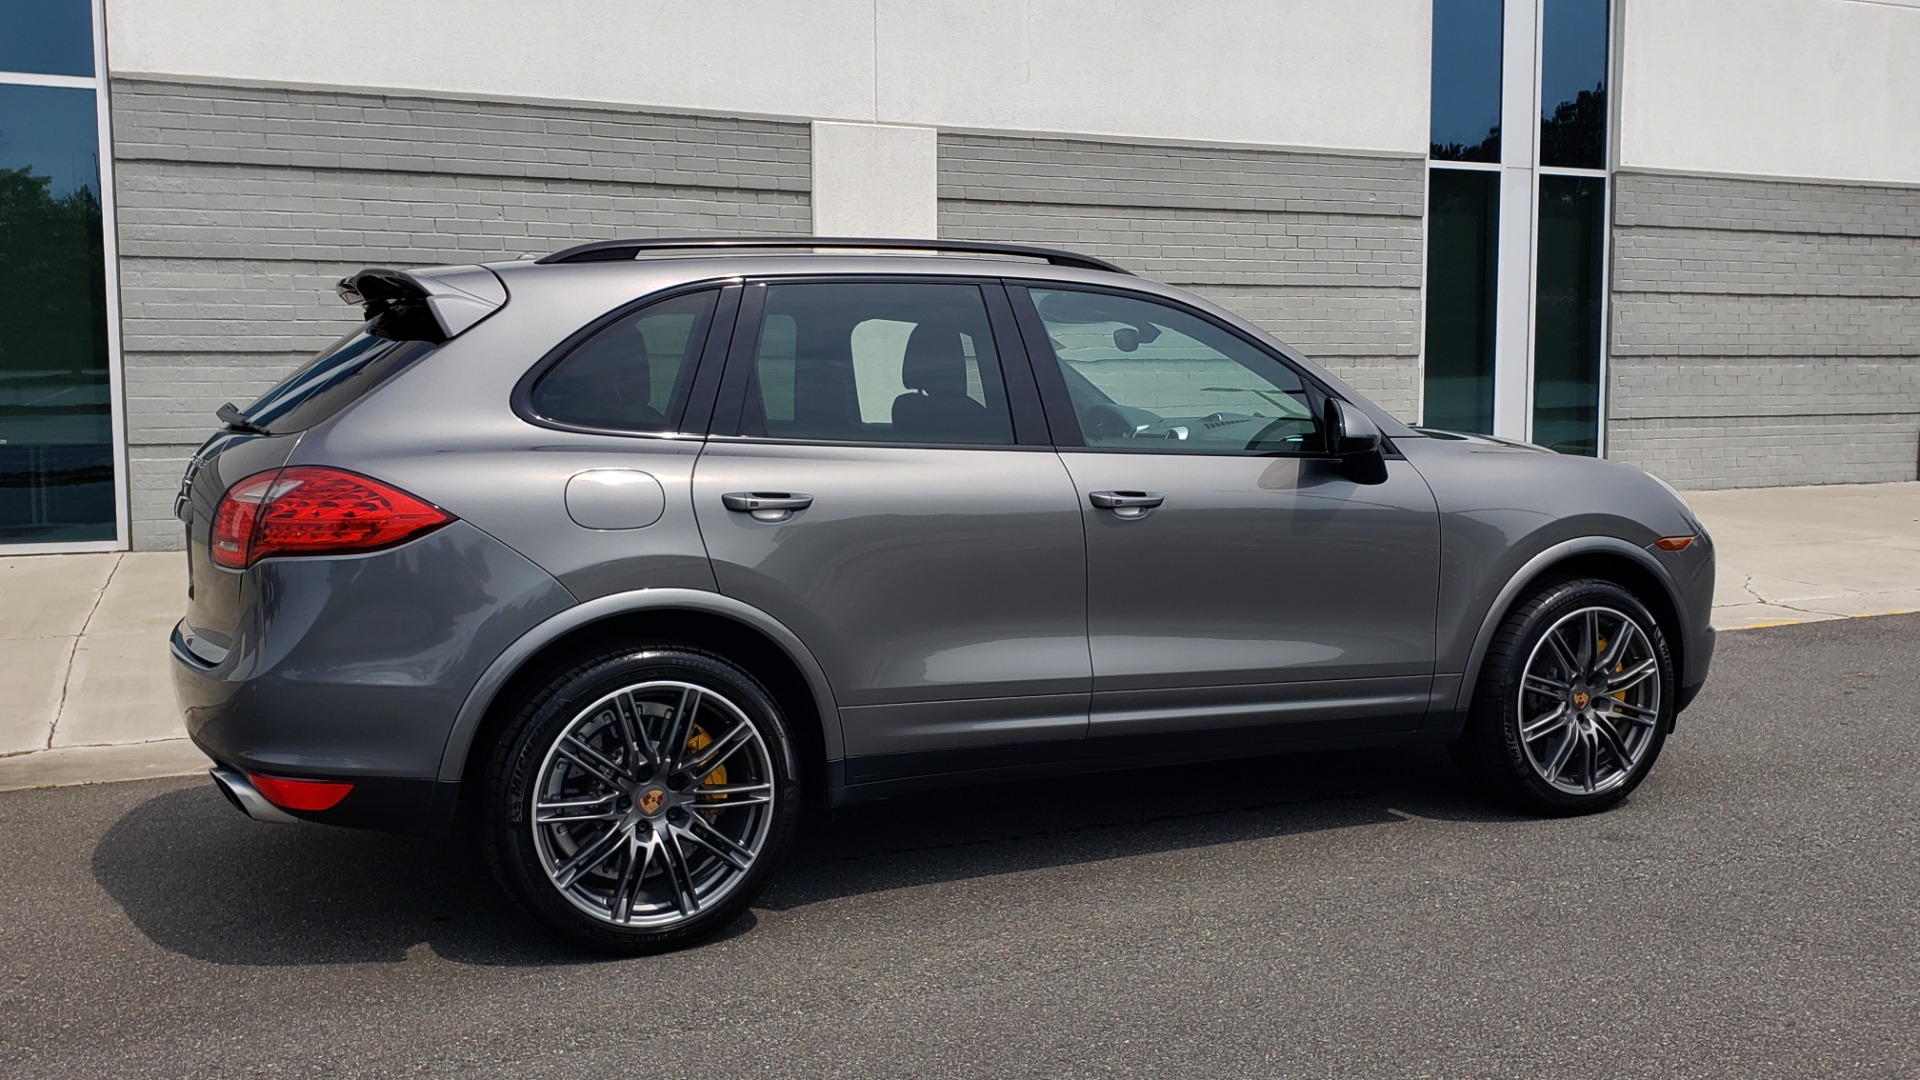 Used 2014 Porsche CAYENNE TURBO S / AWD / NAV / BOSE / PANO-ROOF / LCA / REARVIEW for sale Sold at Formula Imports in Charlotte NC 28227 8